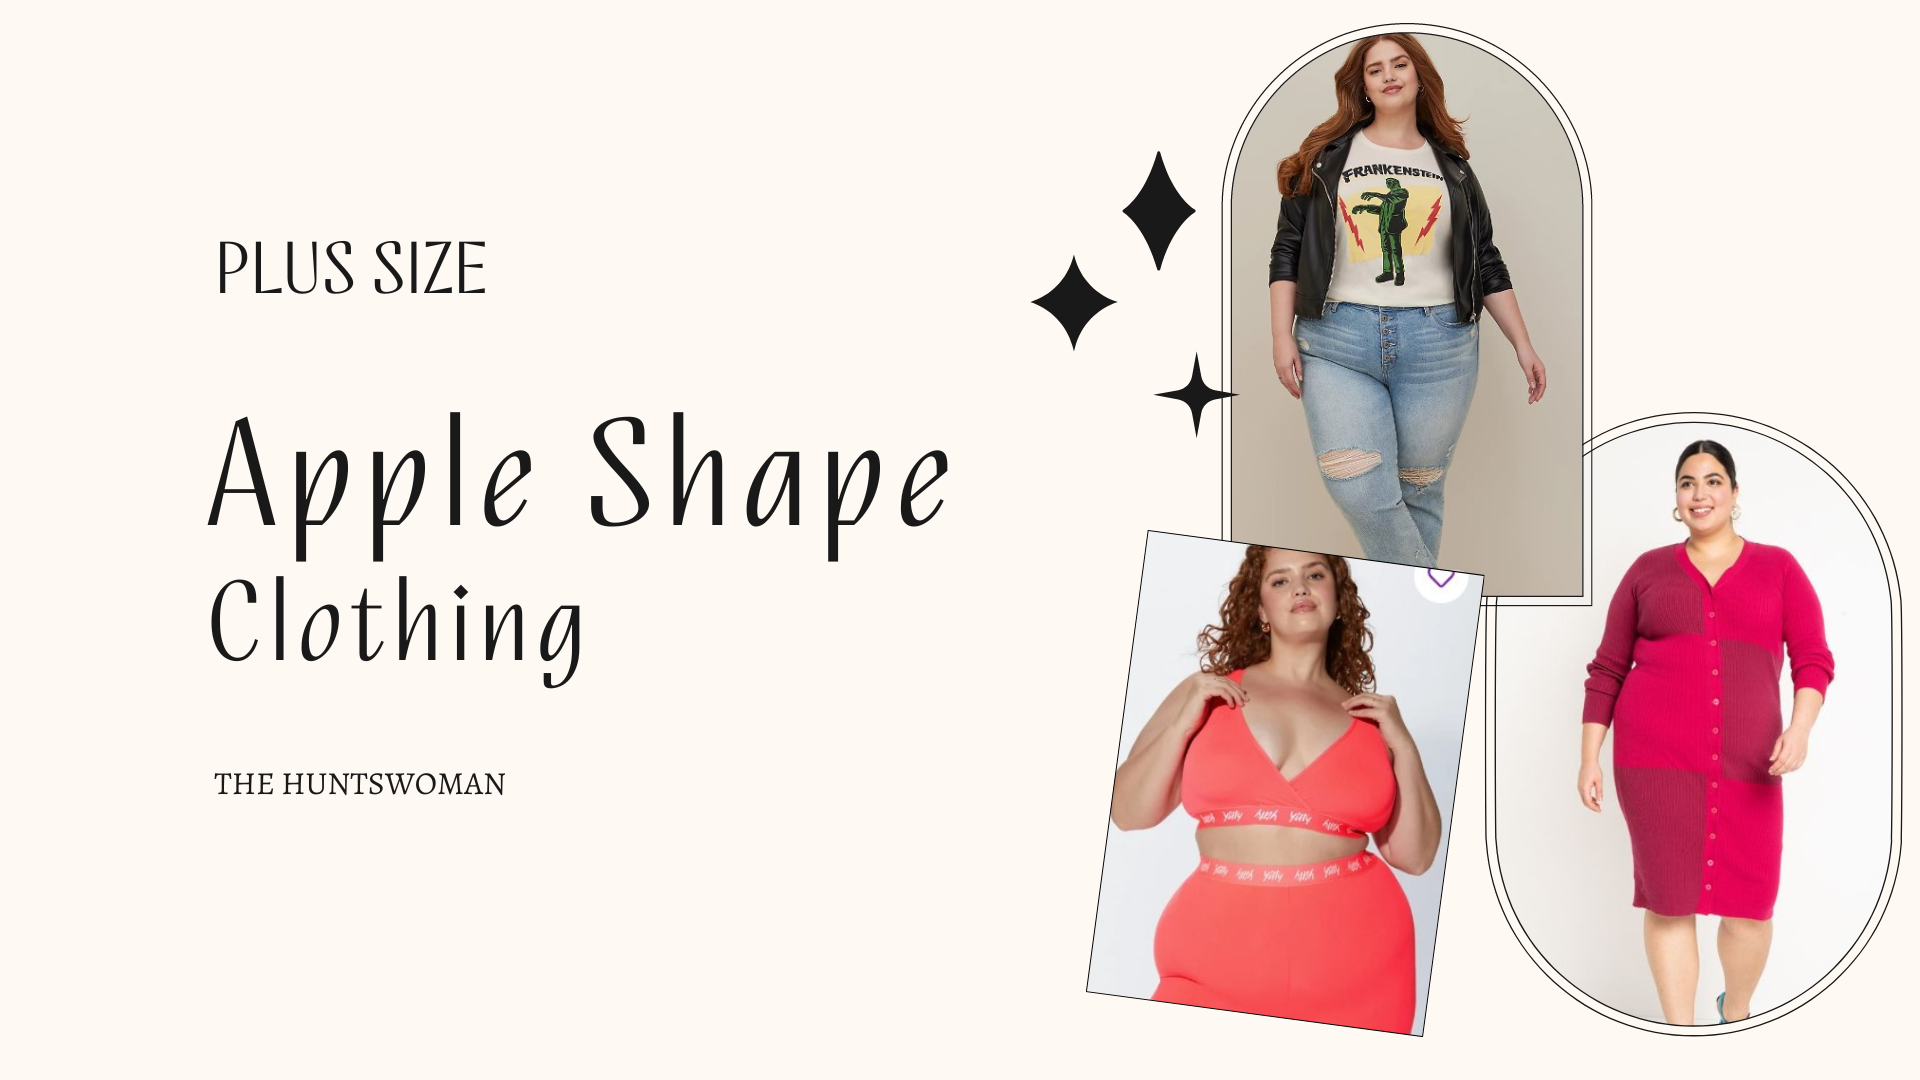 Where To Buy Clothes for the Apple Shape: 9 Chic and Stylish Brands